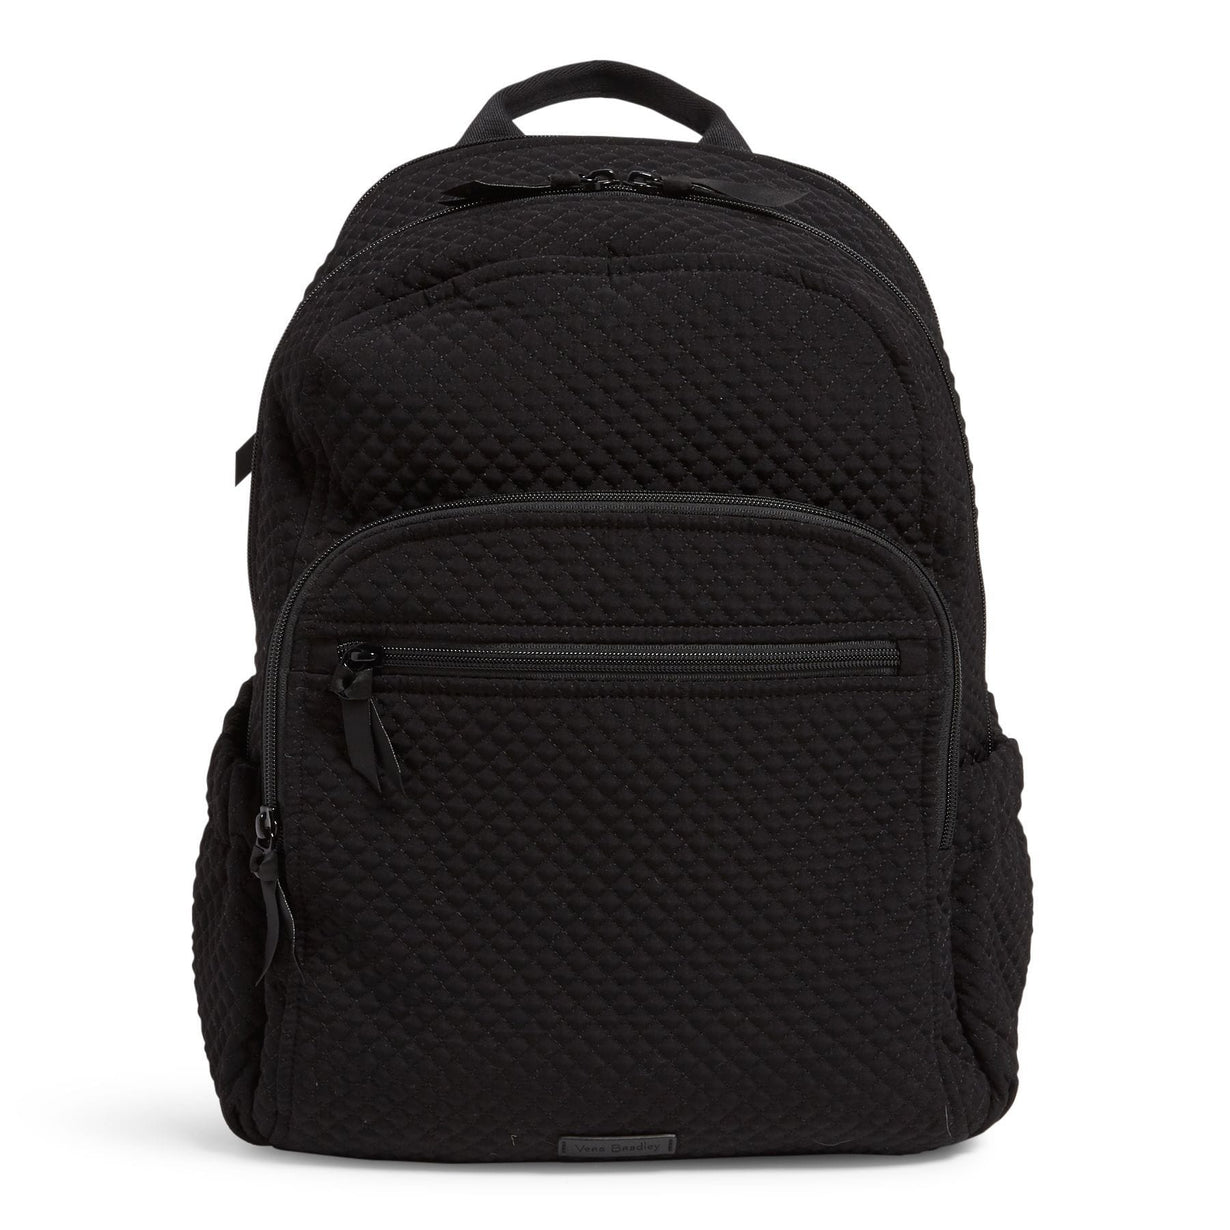 Campus Backpack - Classic Black